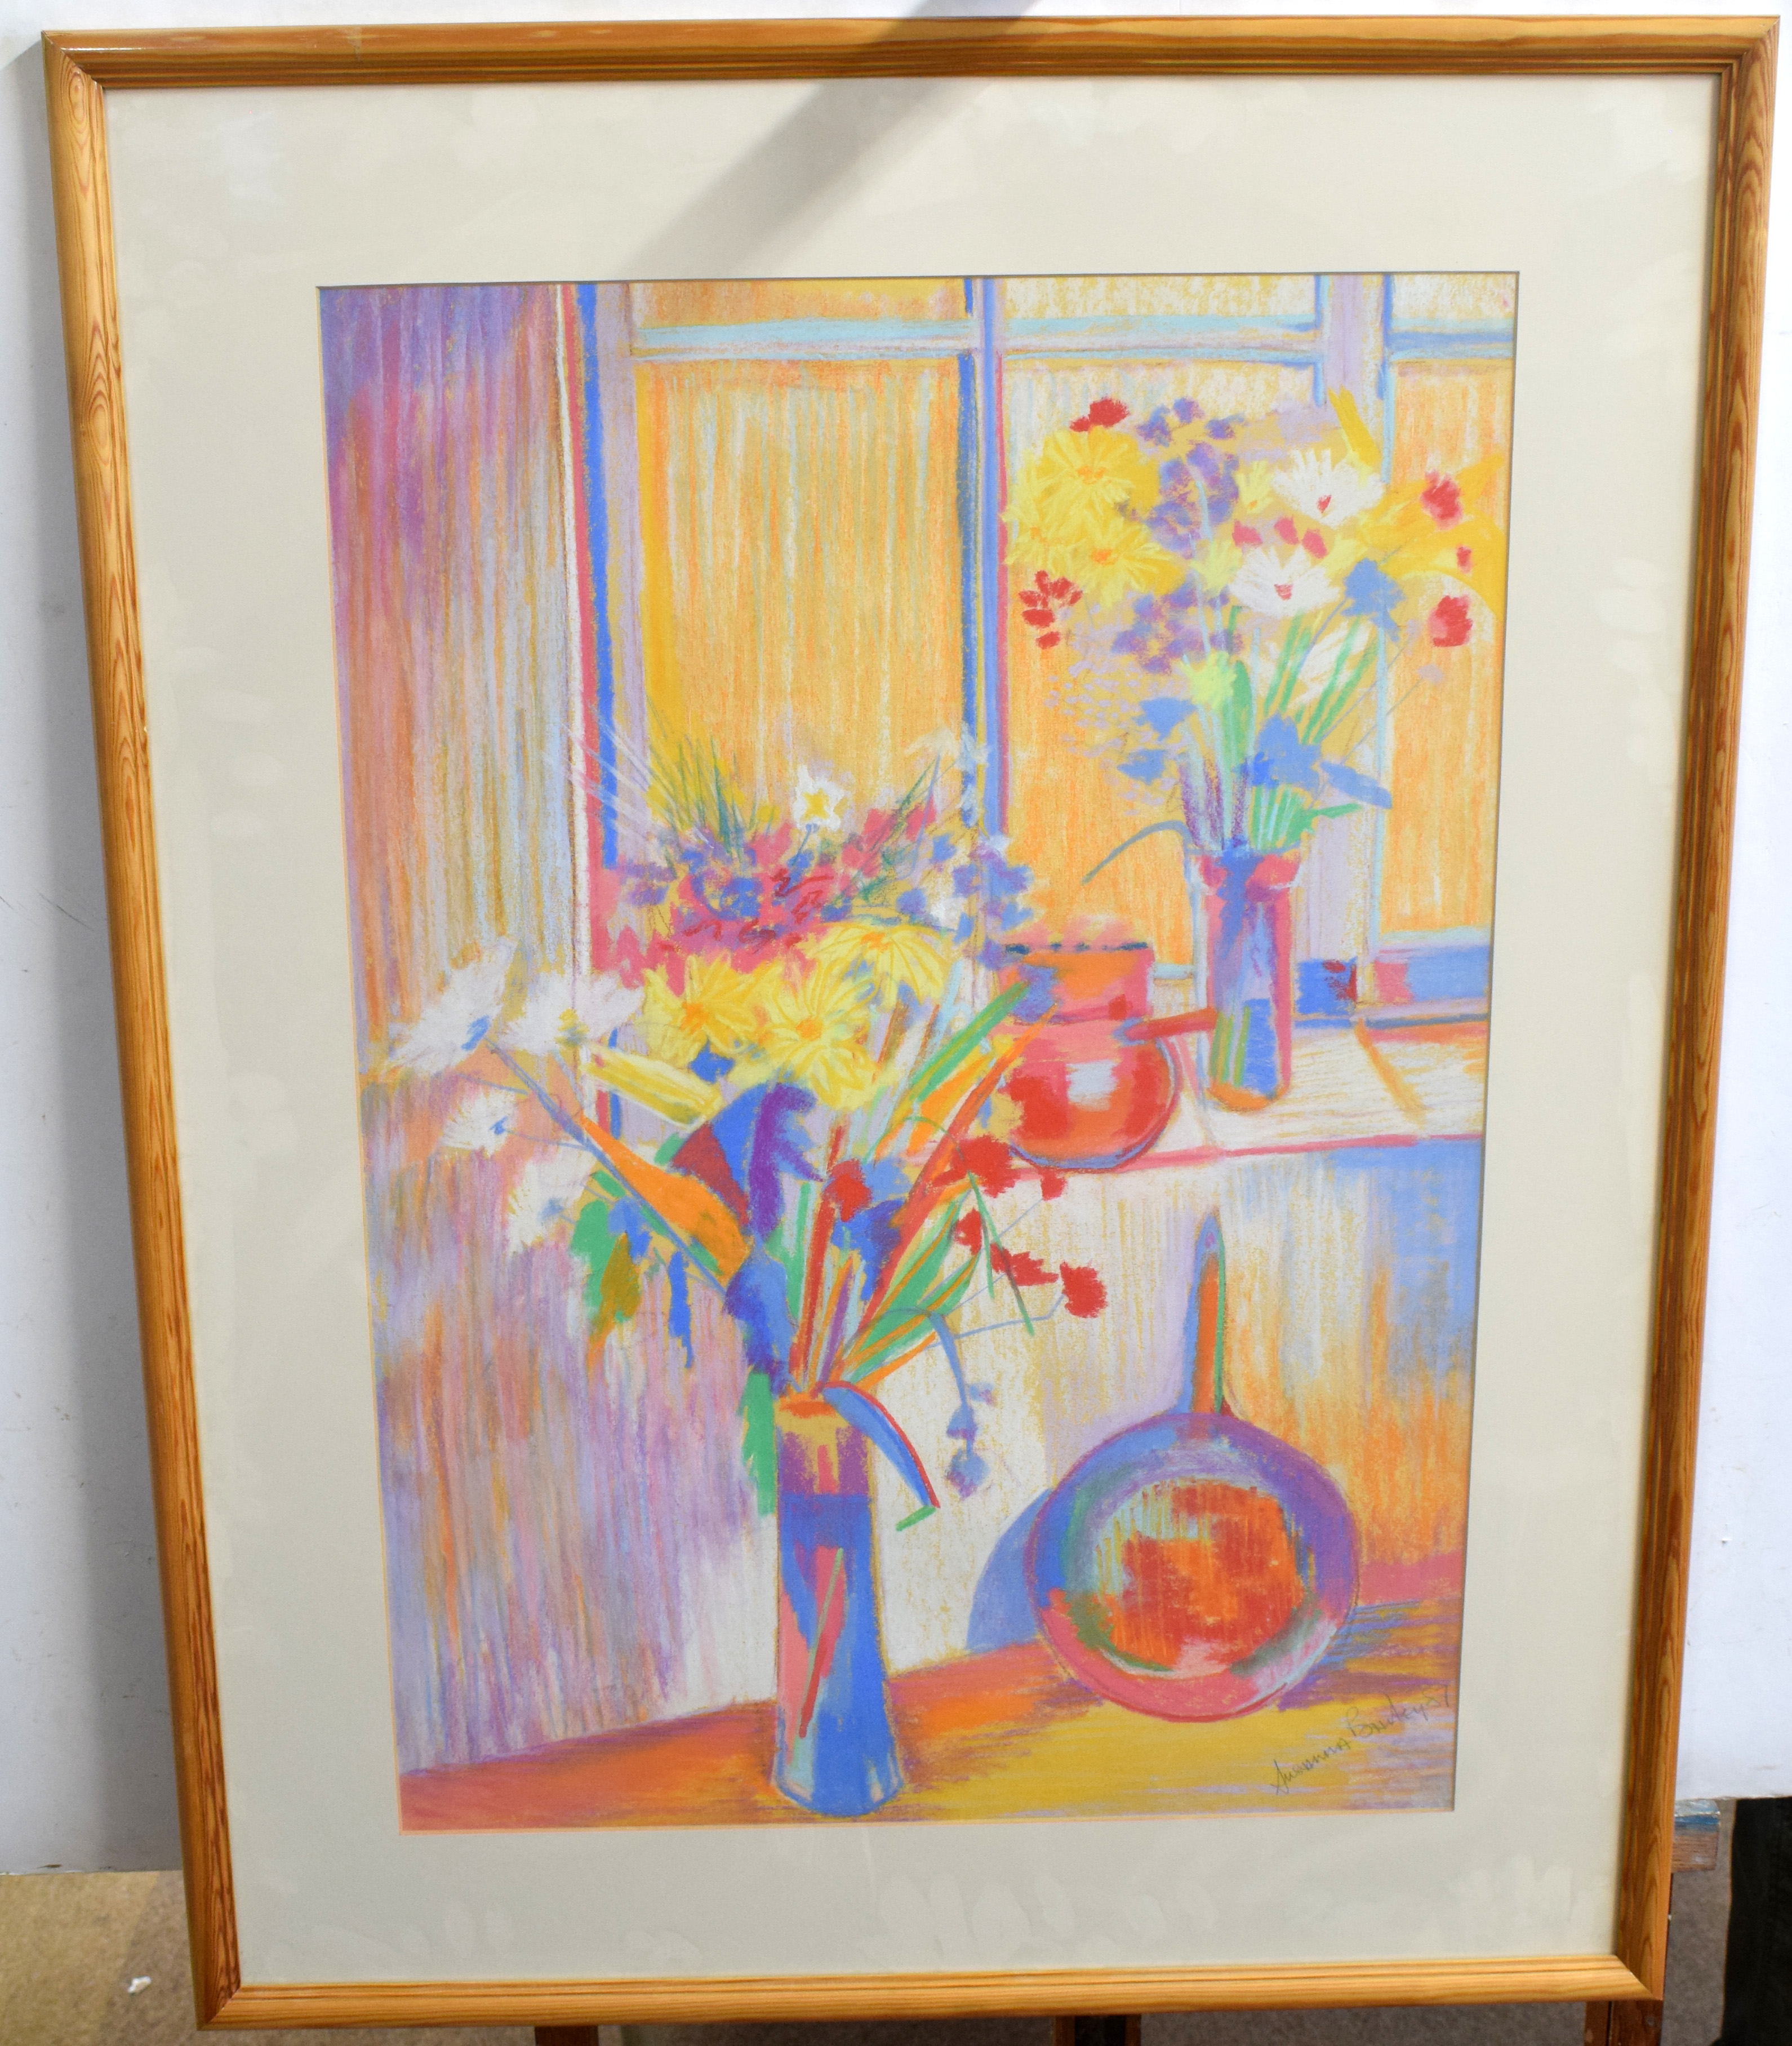 Susanna Bailey (20th century), Still Life study, crayon drawing, signed and dated 87 lower right, 73